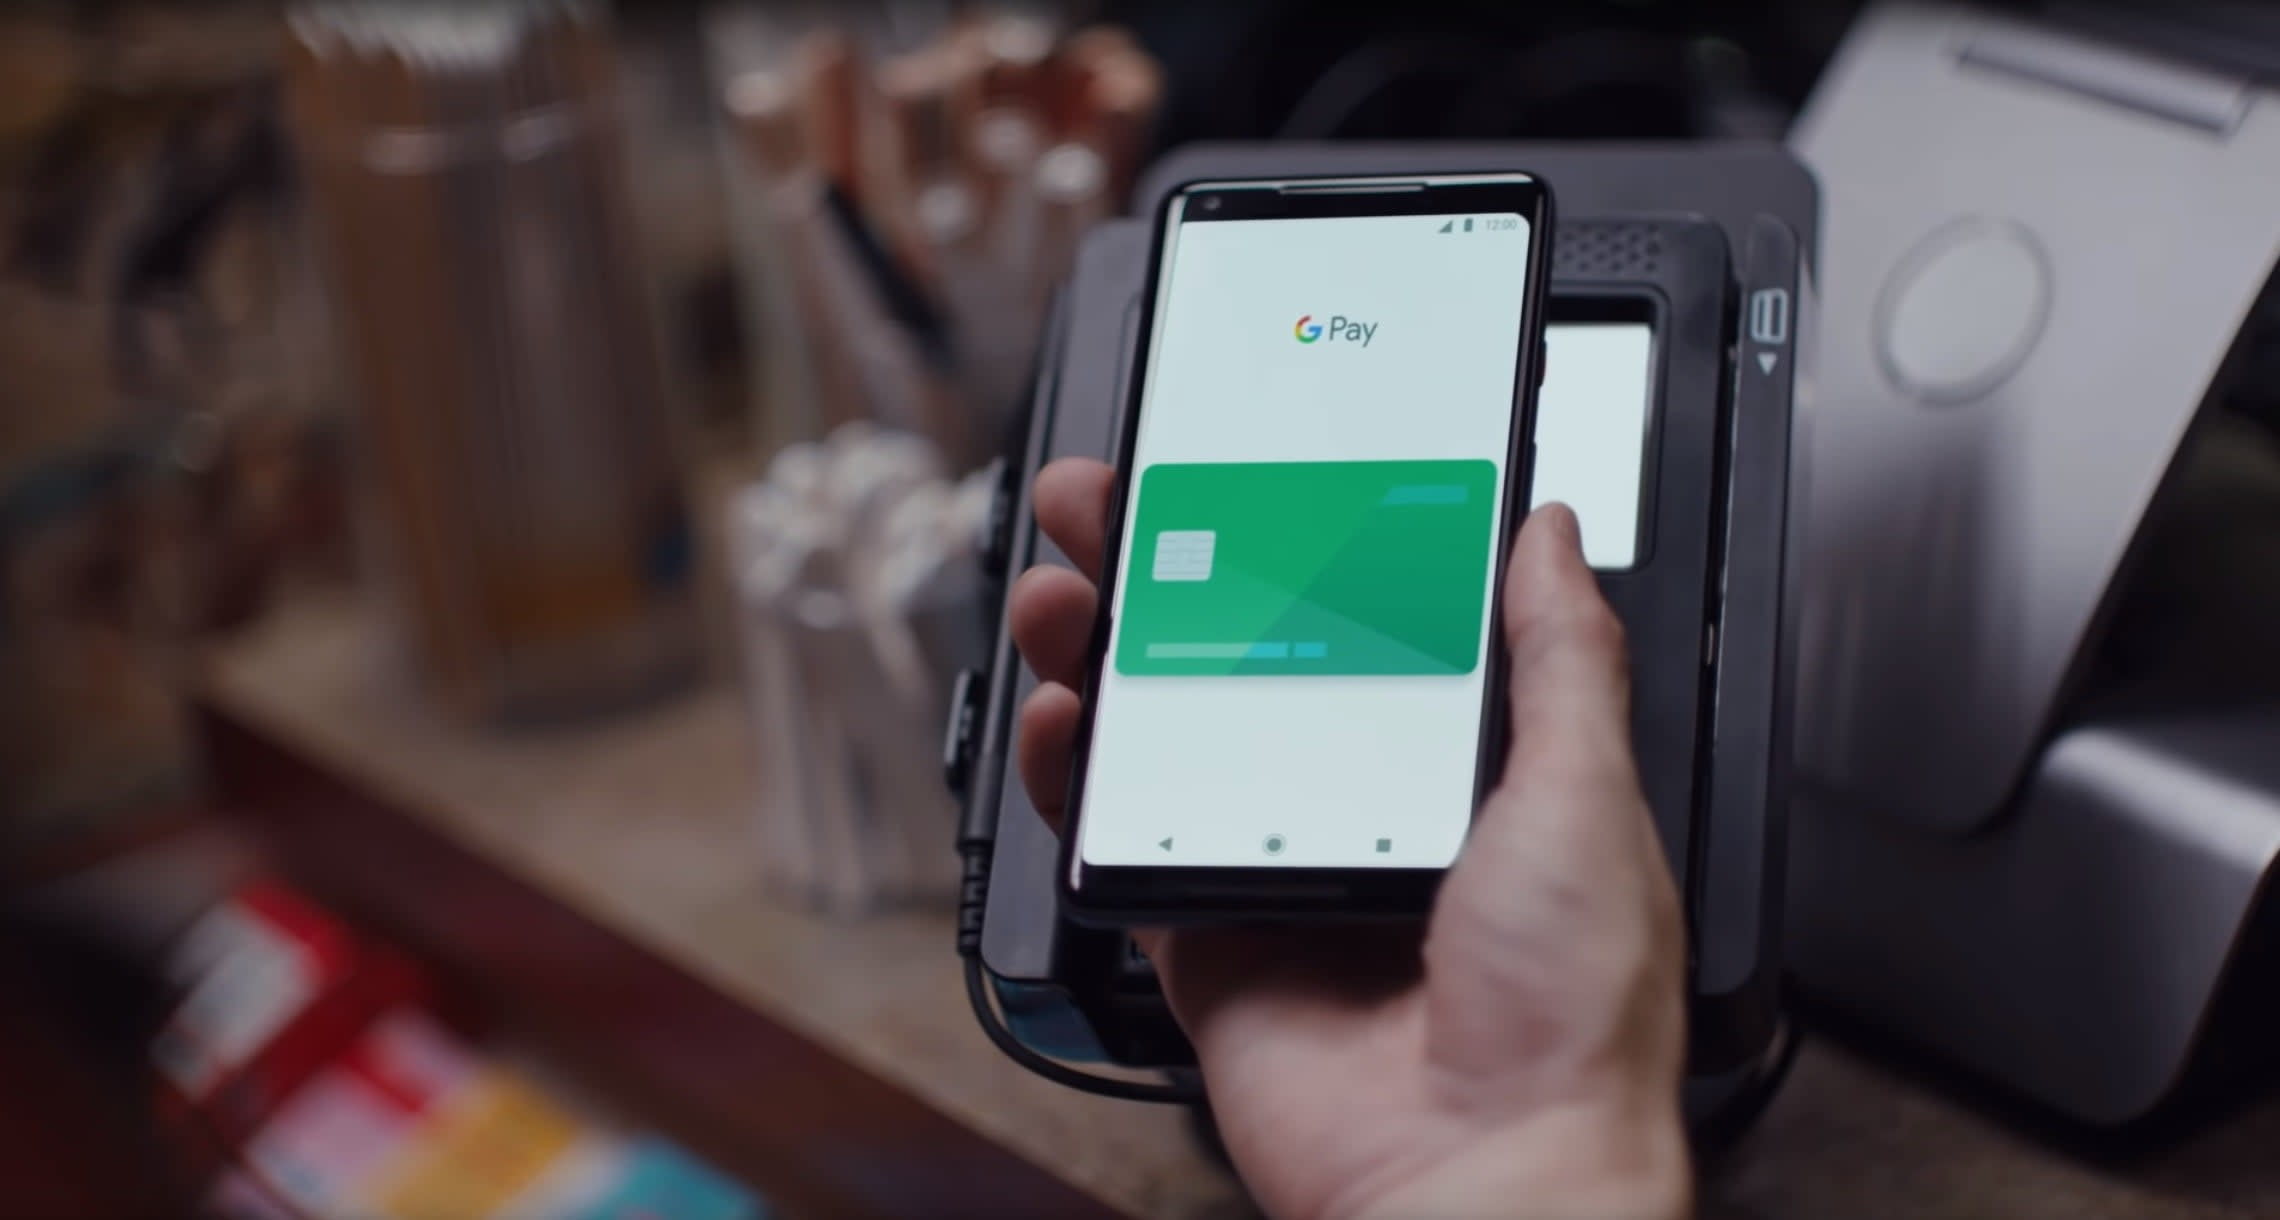 Apple Pay Google Pay Will Work With Mta S Tap And Pay System For Nyc Transit